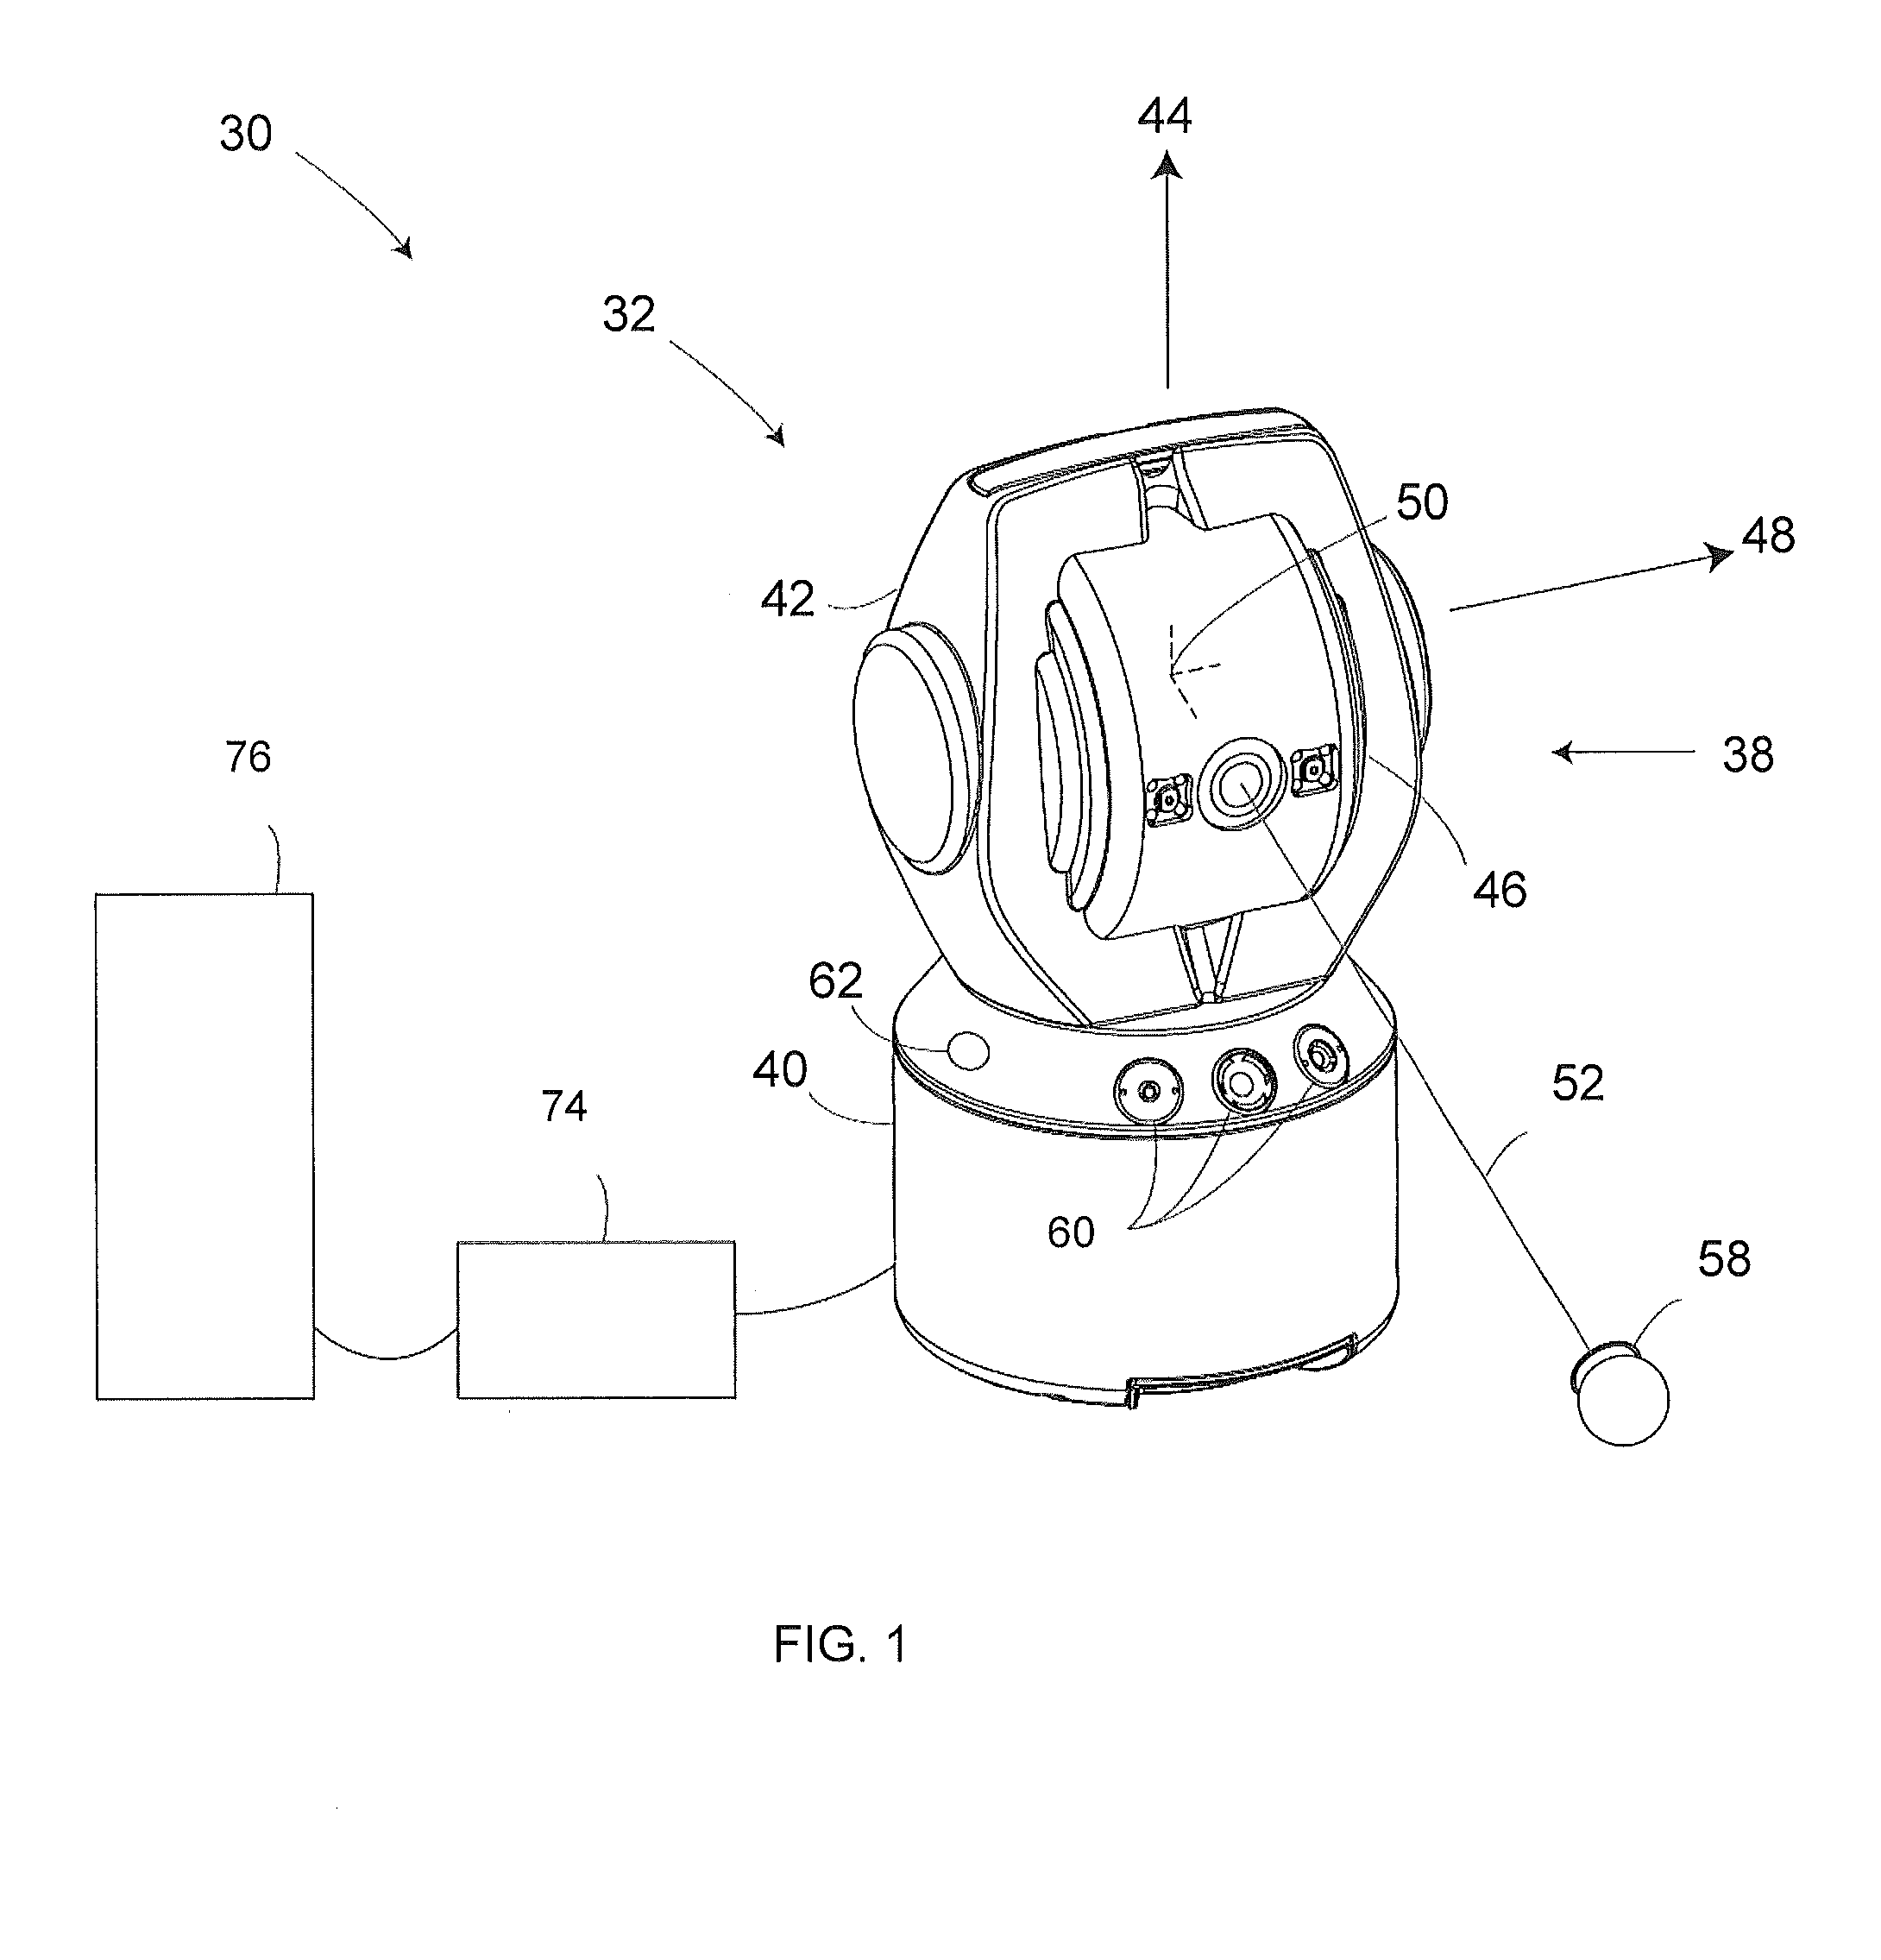 Multi-mode optical measurement device and method of operation